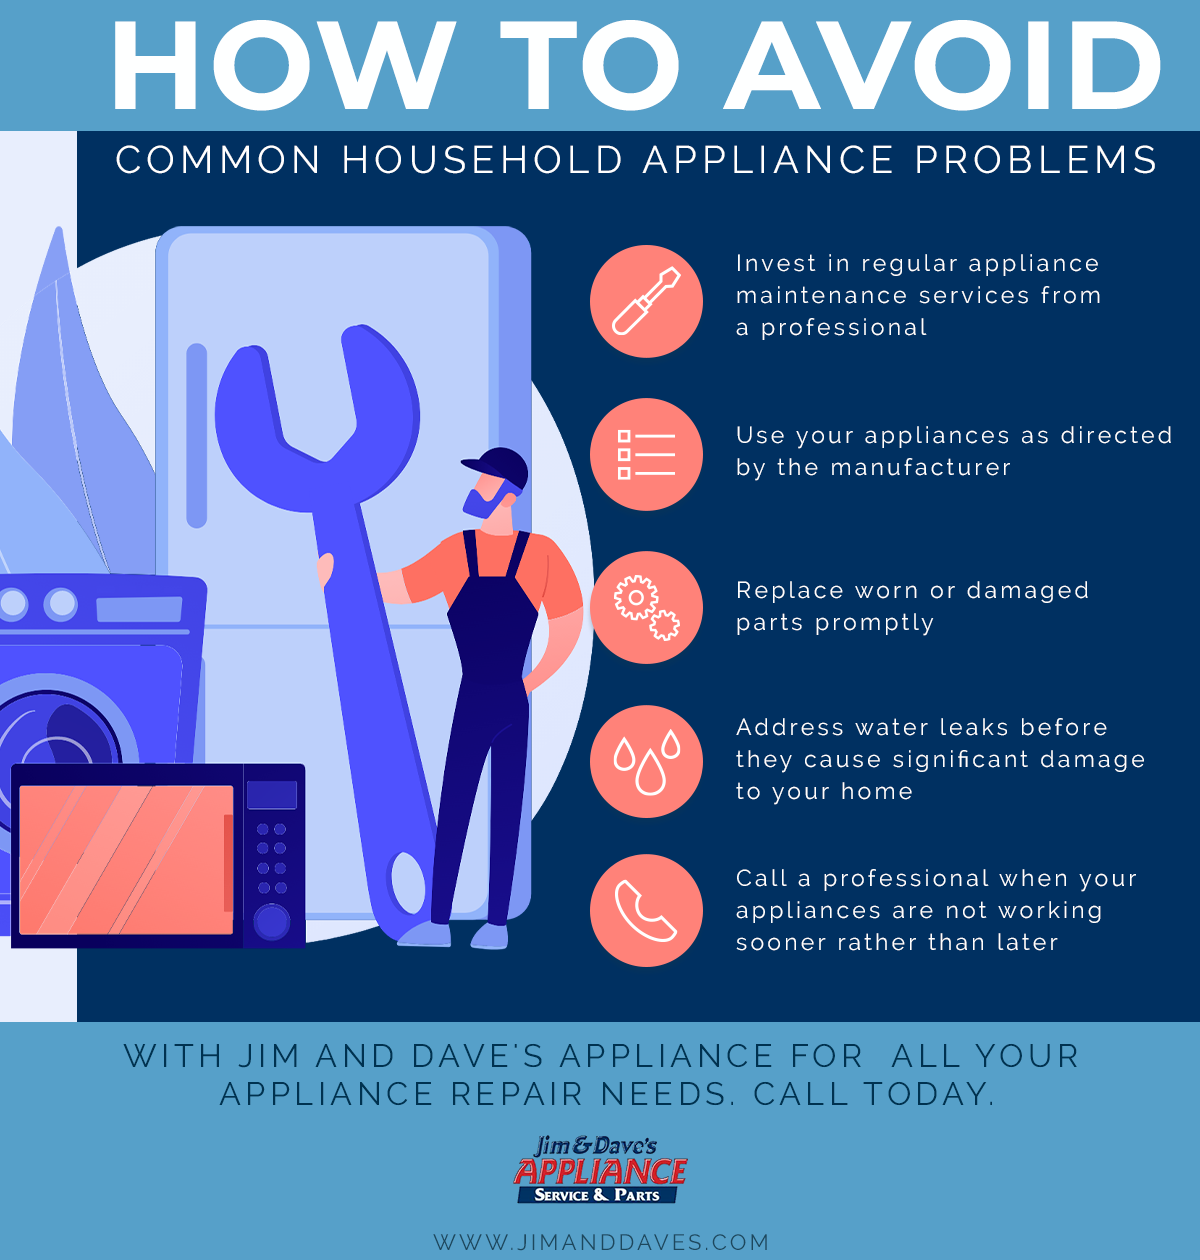 How To Avoid Common Appliance Problems_infographic.png